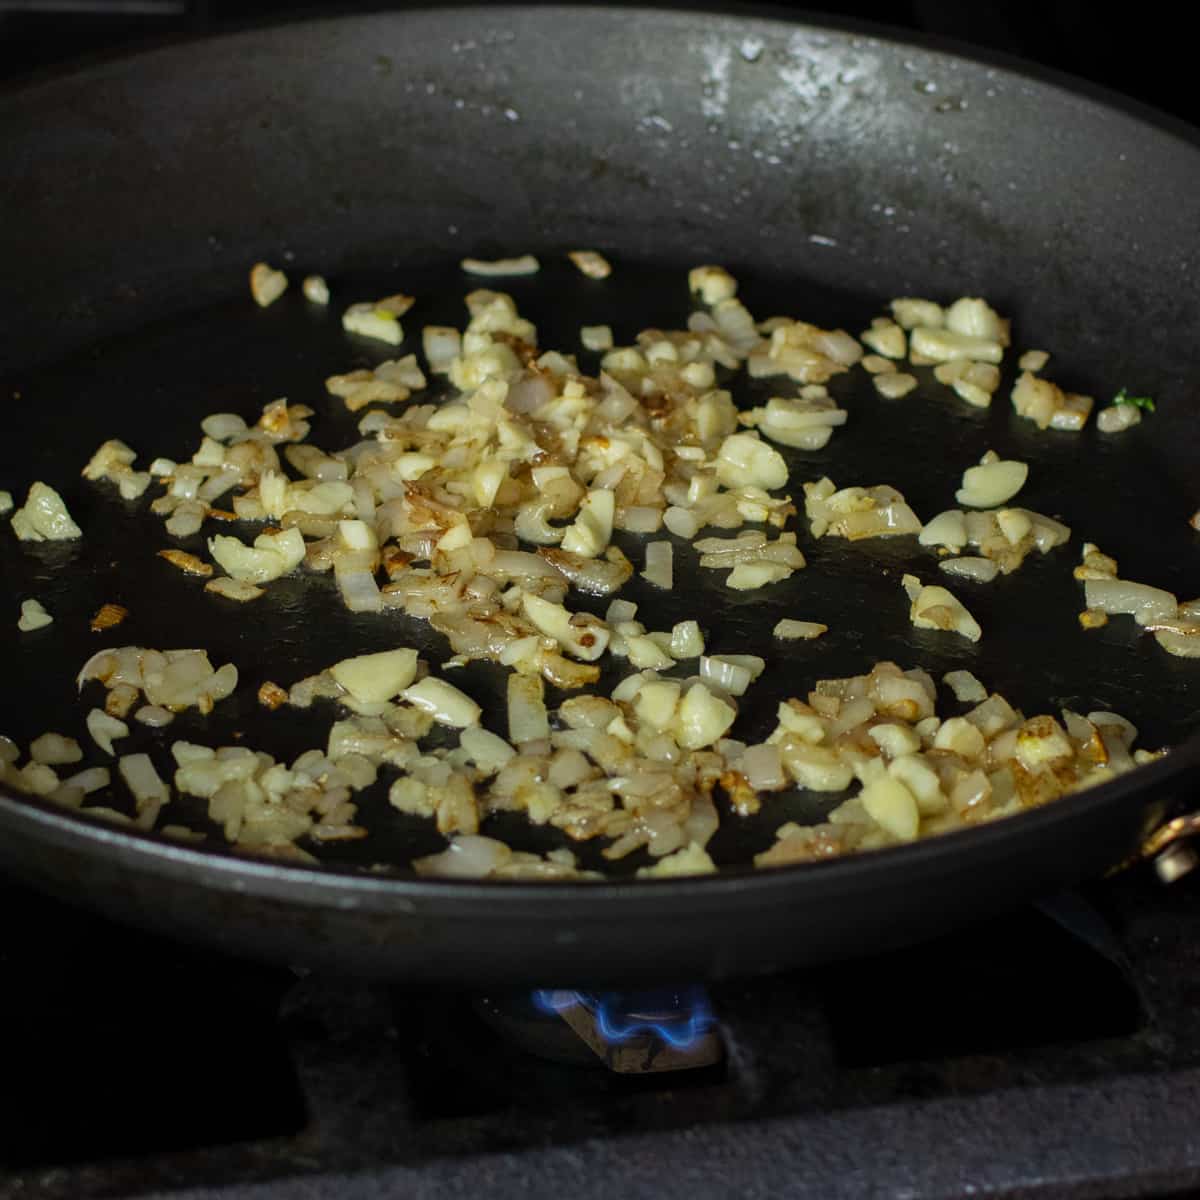 Minced shallot and garlic sautéing in a frying pan.